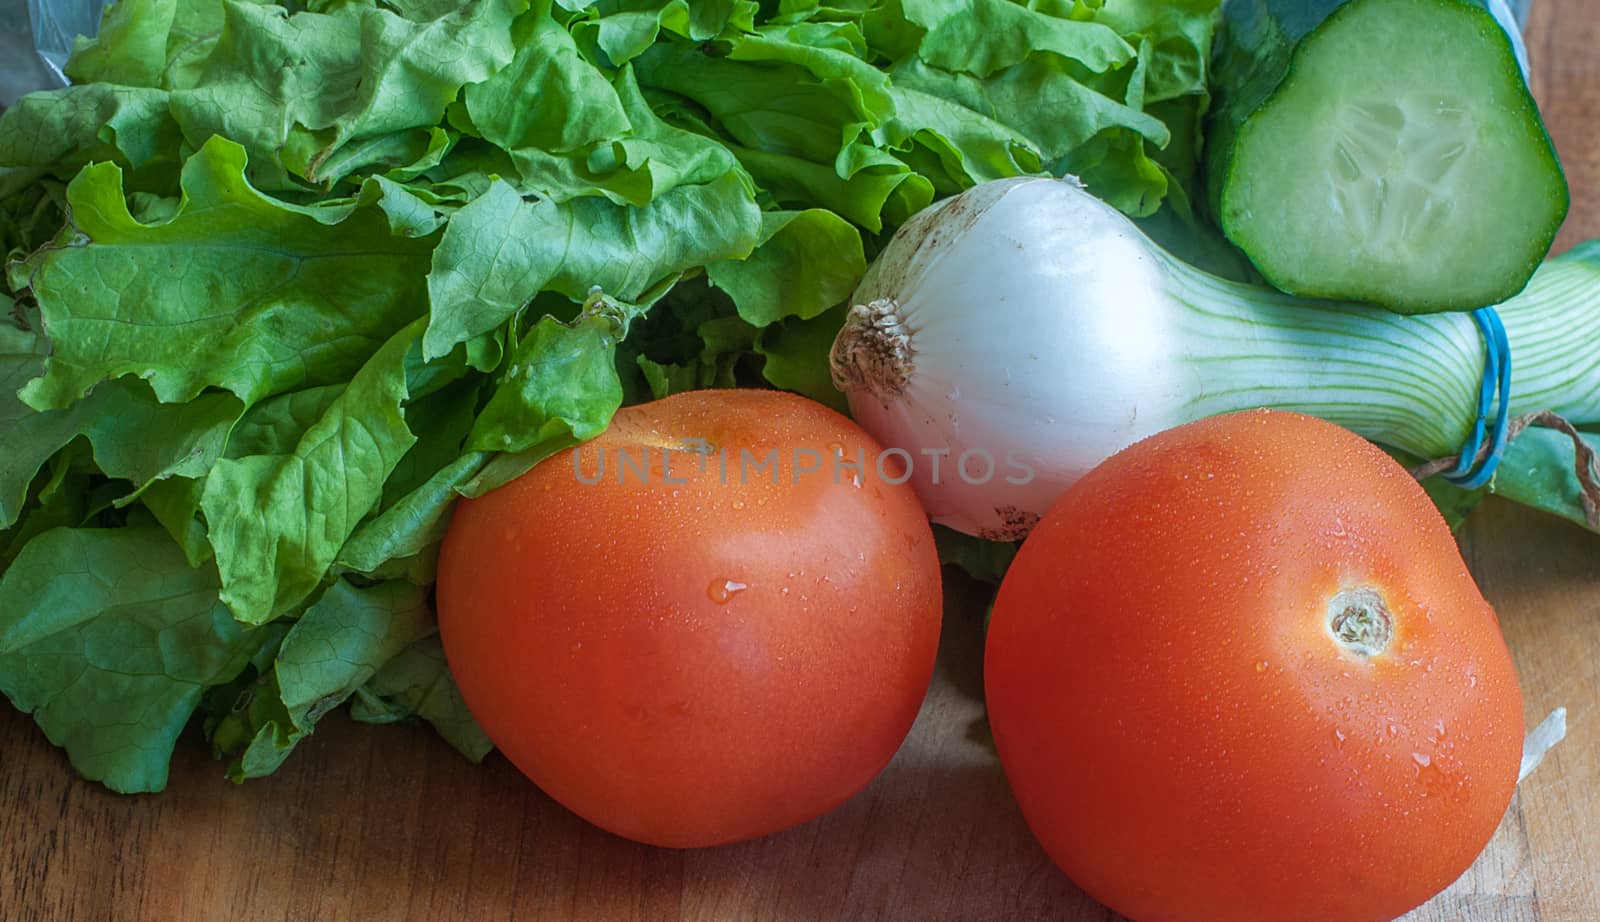 salad ingredients of tomato,cucumber,spring onion and lettuce by sirspread